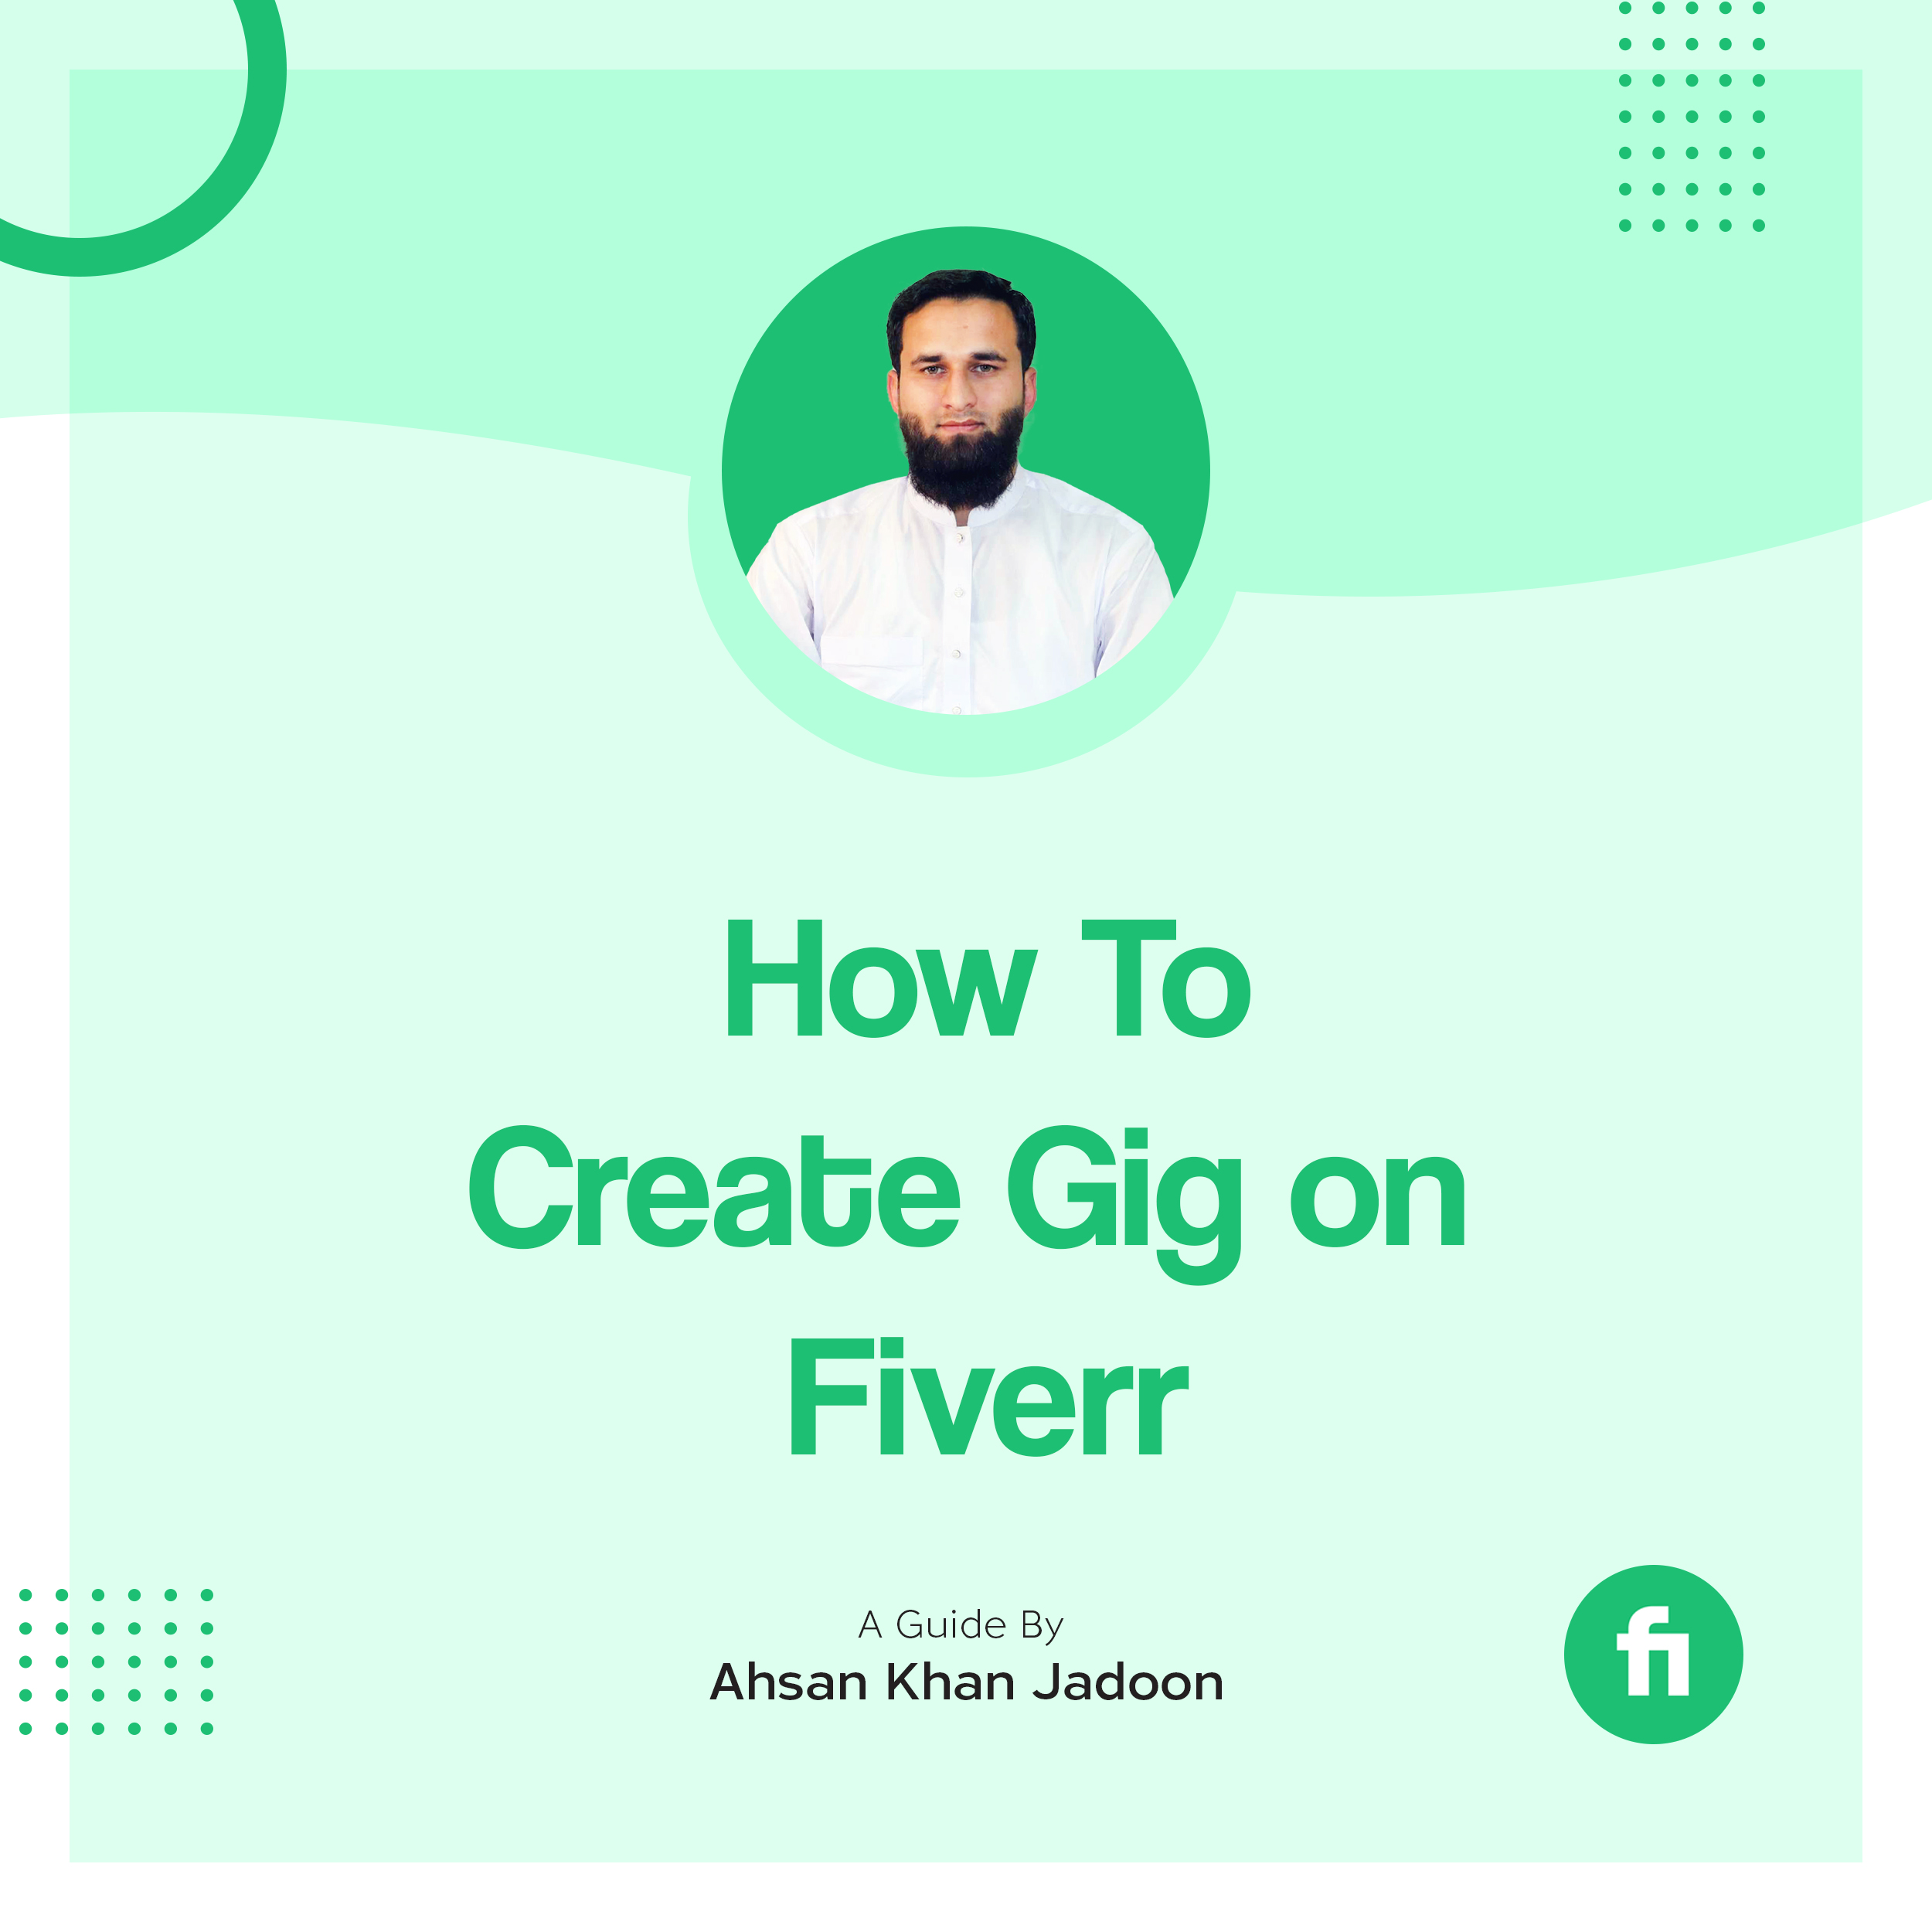 Design Fiverr How to create Fiverr Gig Cover